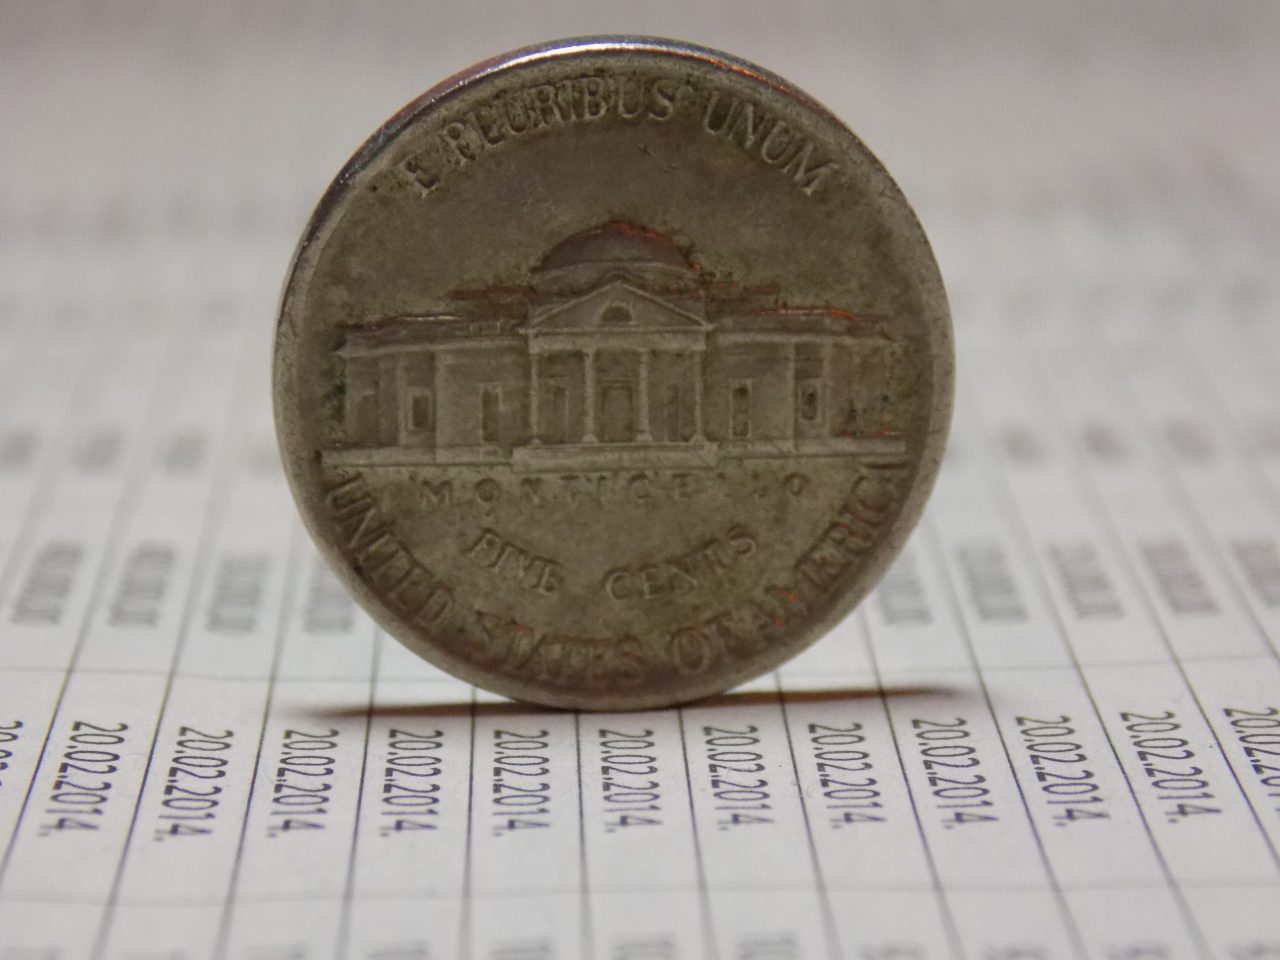 Five US cents coin on financial paper